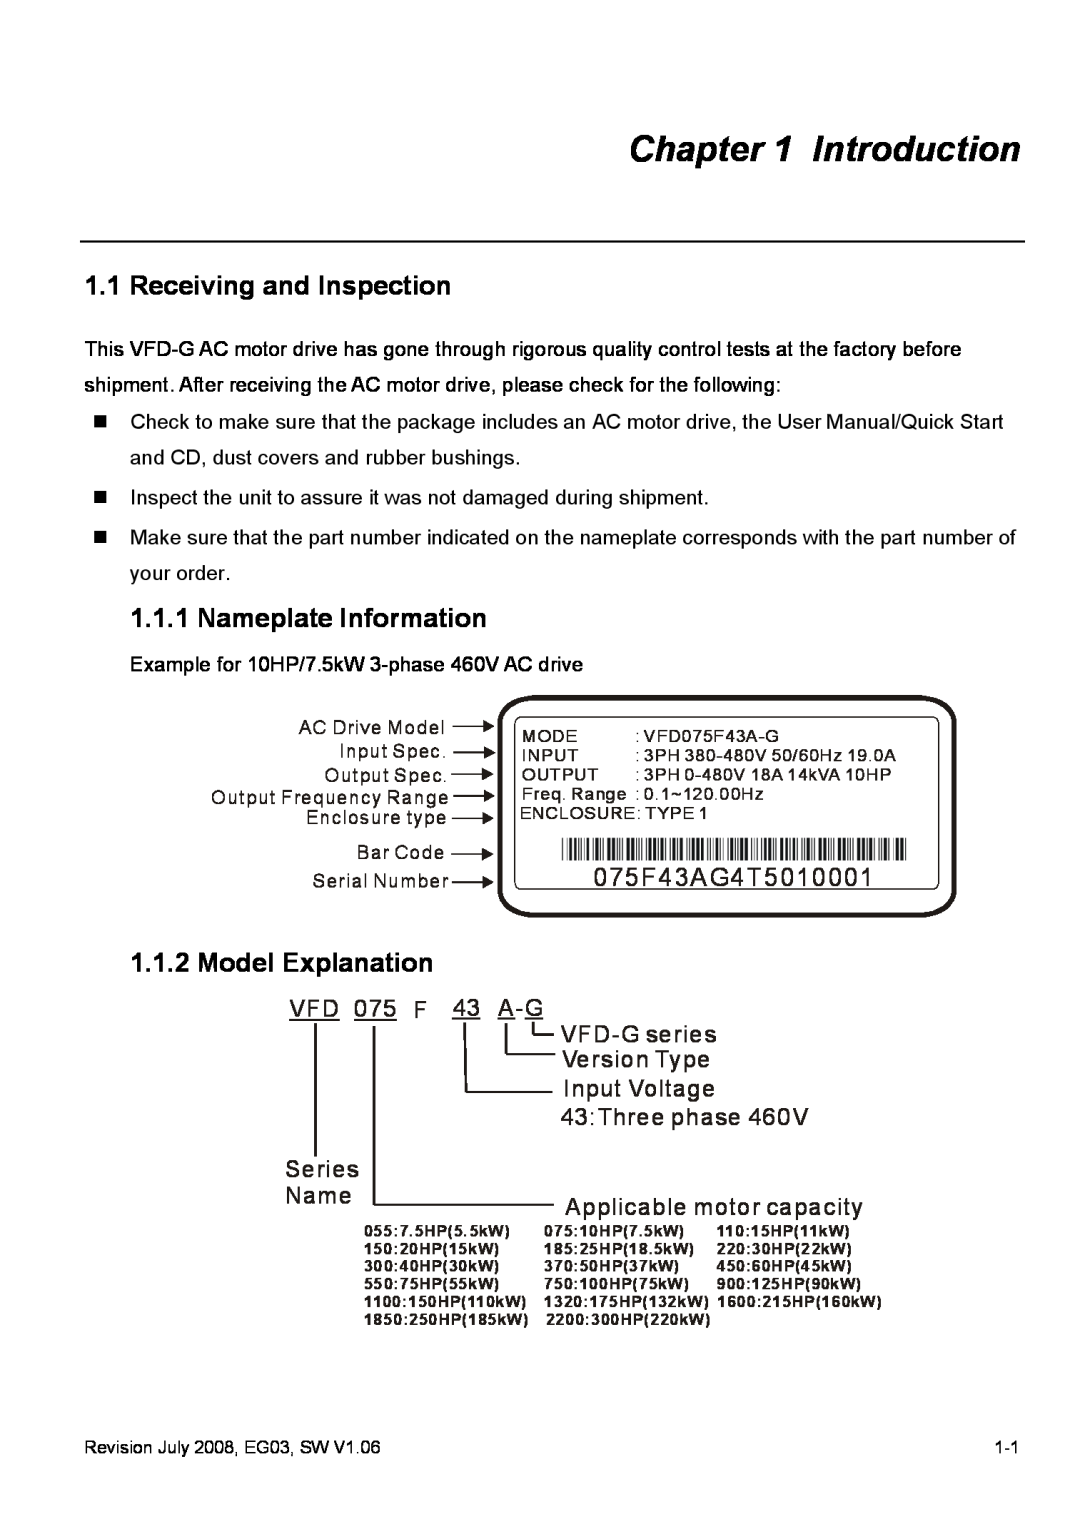 Delta Electronics VFD-G Introduction, Receiving and Inspection, Nameplate Information, 075F43AG4T5010001, VFD 075 F 43 A-G 